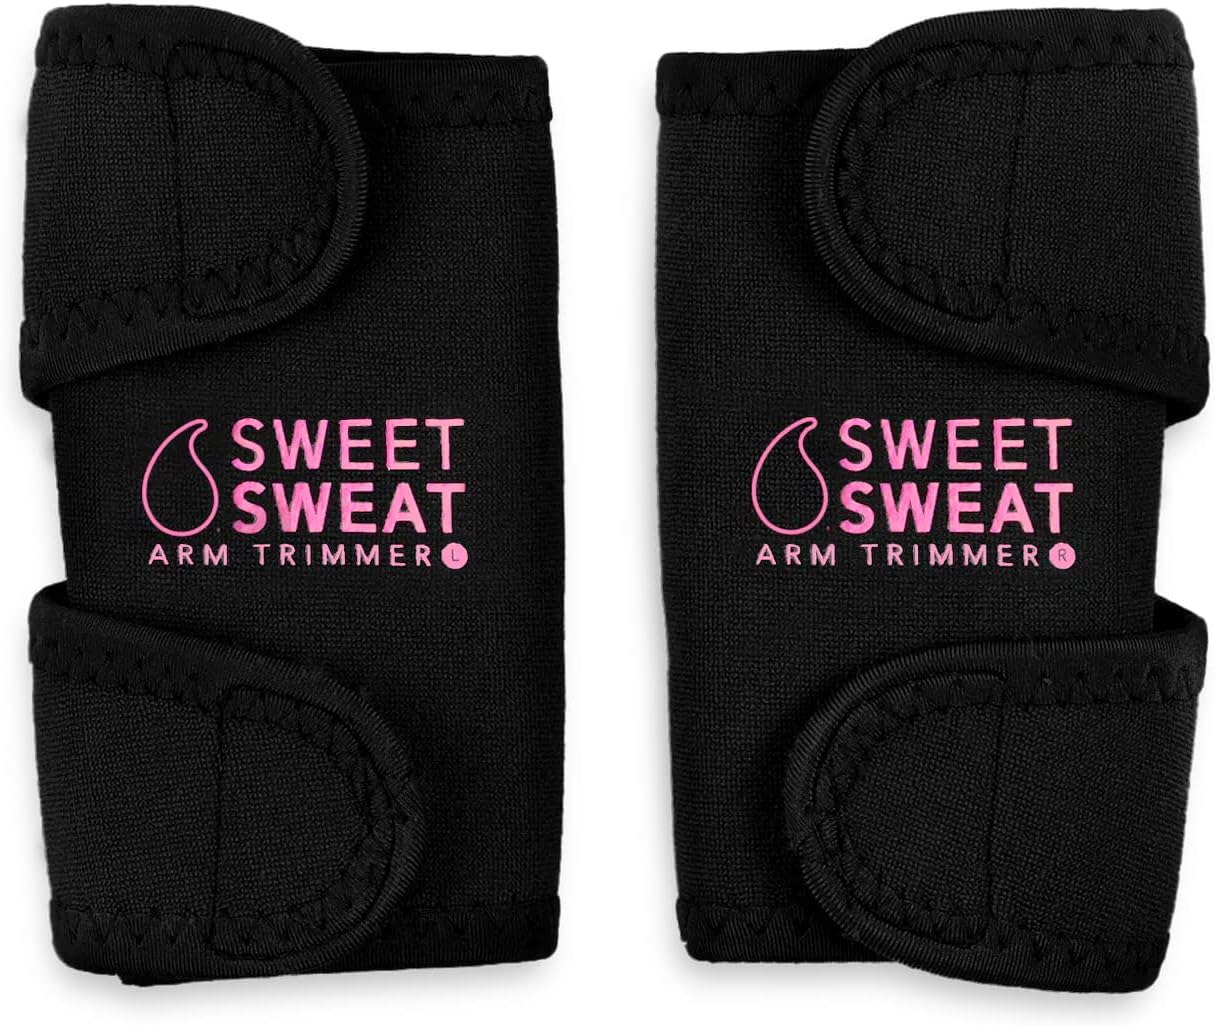 Sports Research Sweet Sweat Arm Trimmers Review